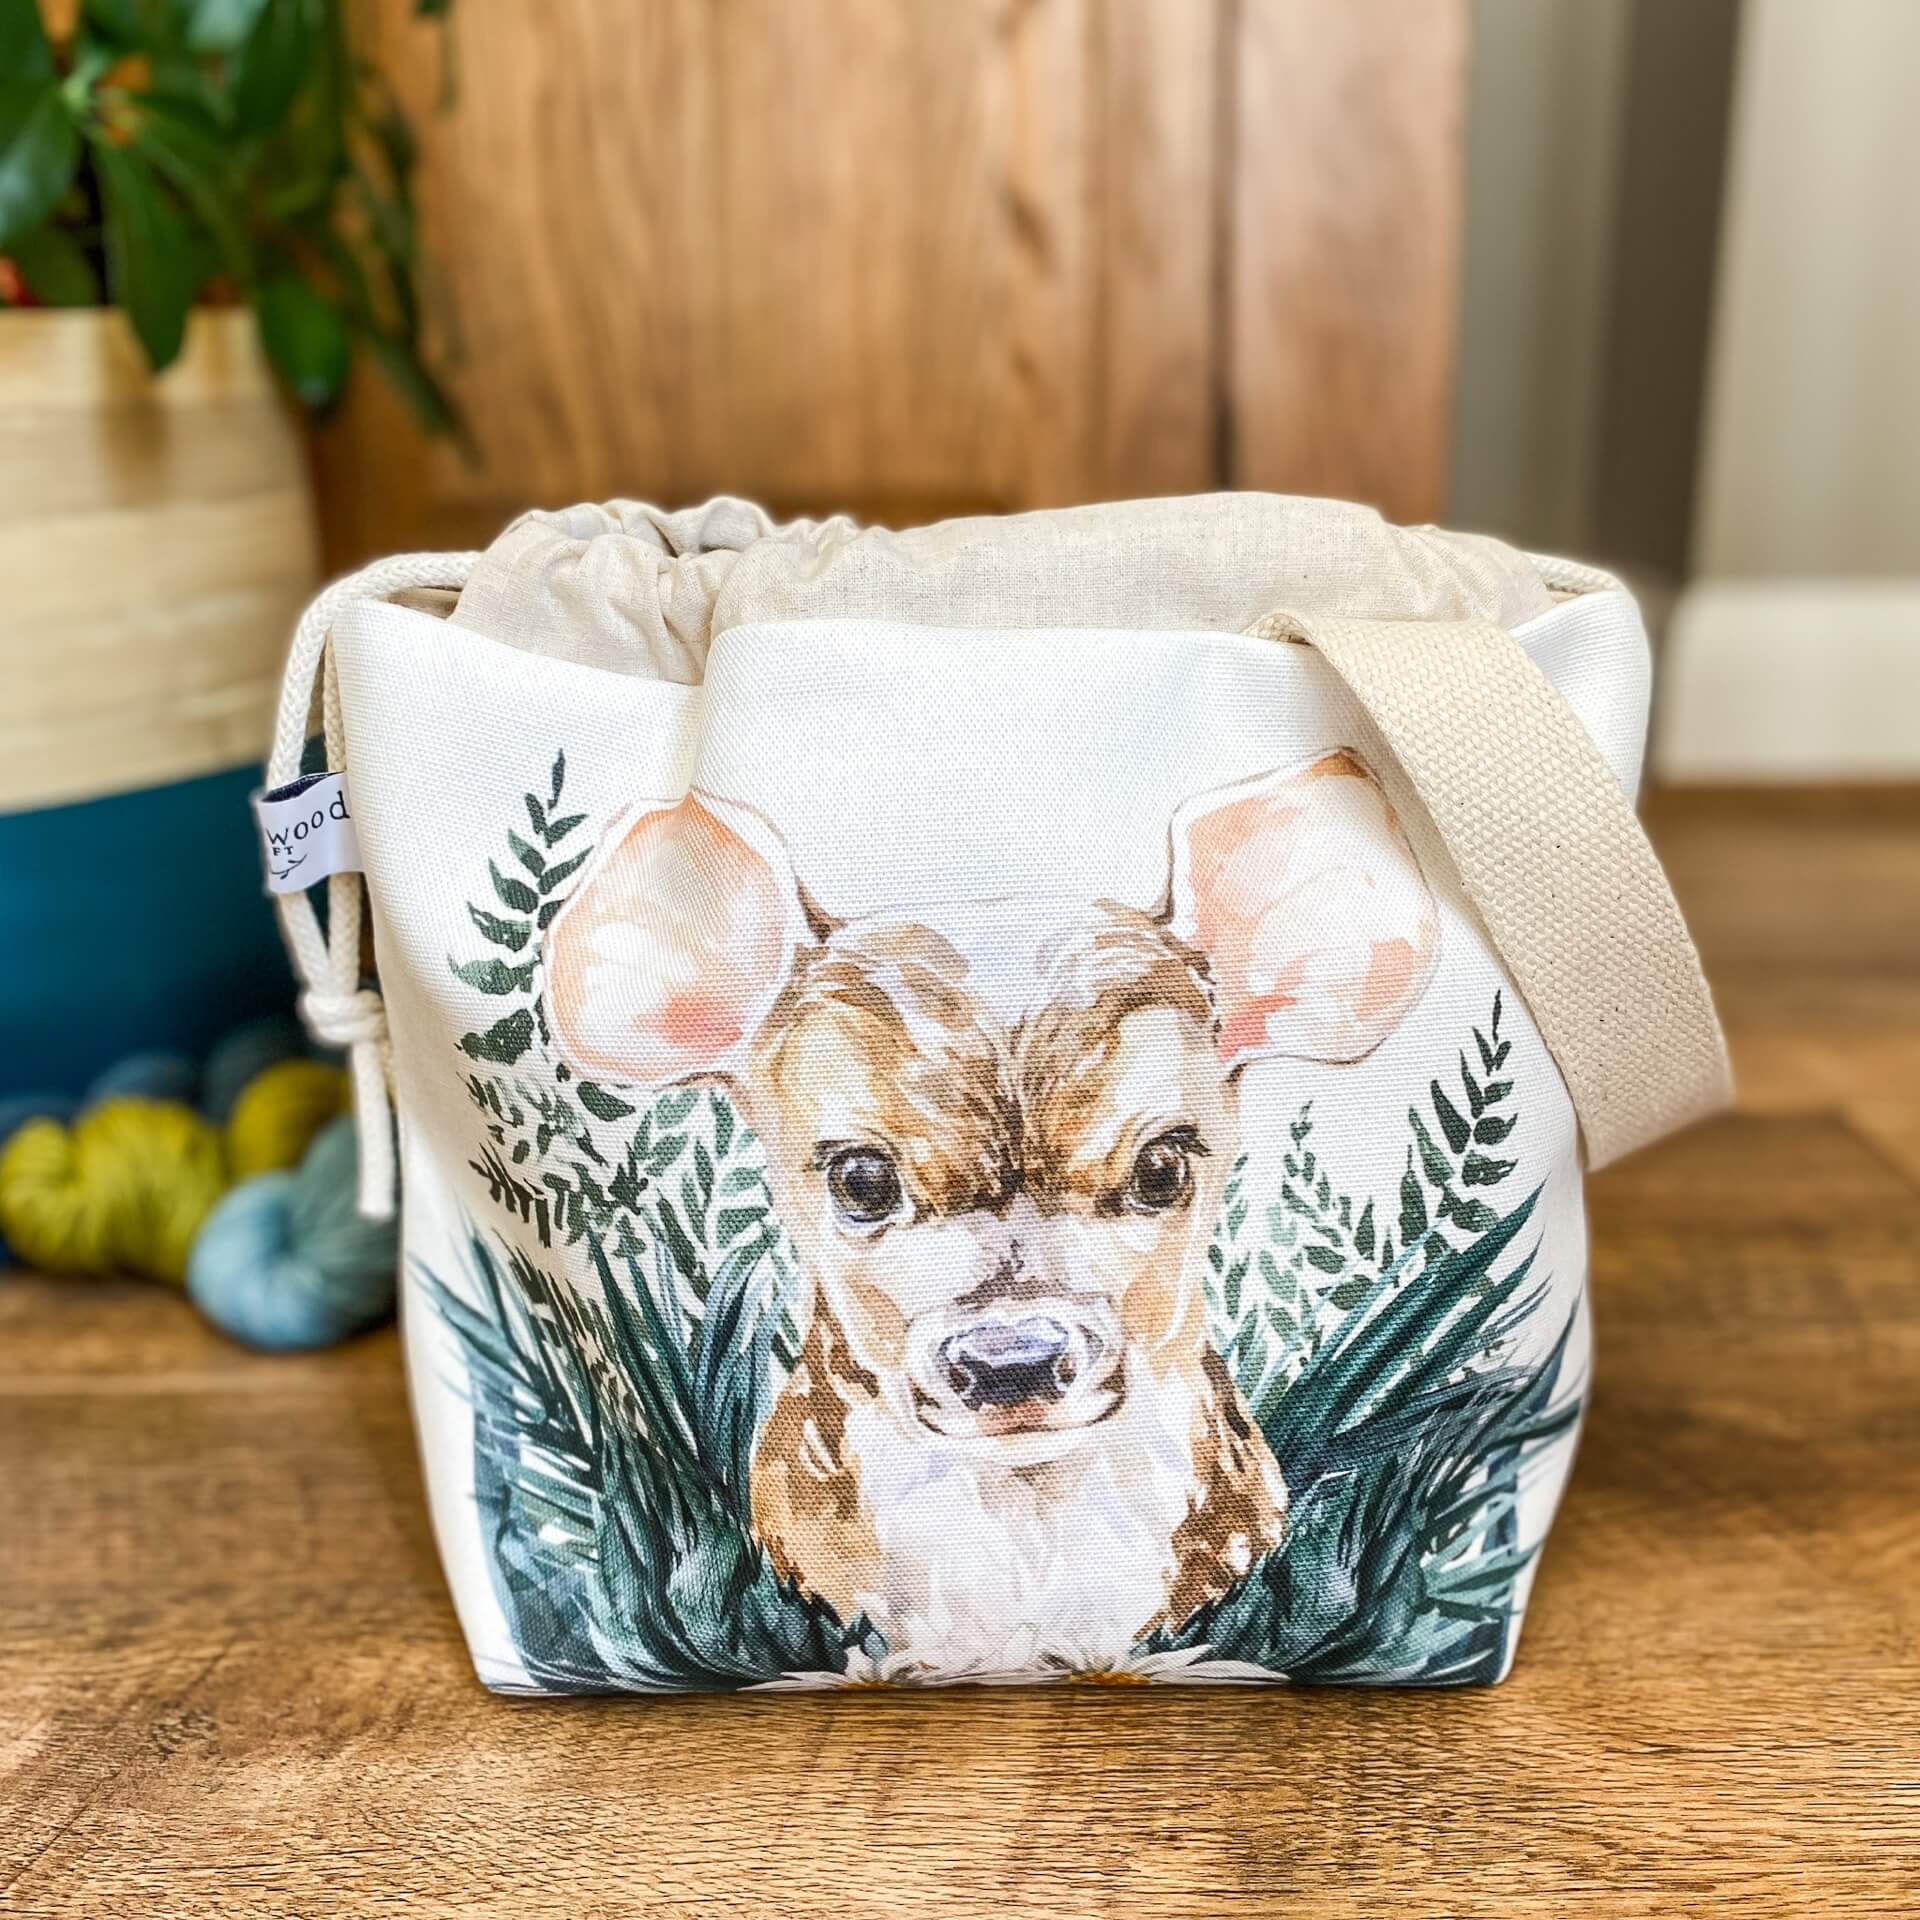 A project bag for knitting is seen on a wooden floor. The bag is a drawstring bag and on the fabric is a baby deer with big ears sitting in amongst greenery with some yarn and a house plant in the background.